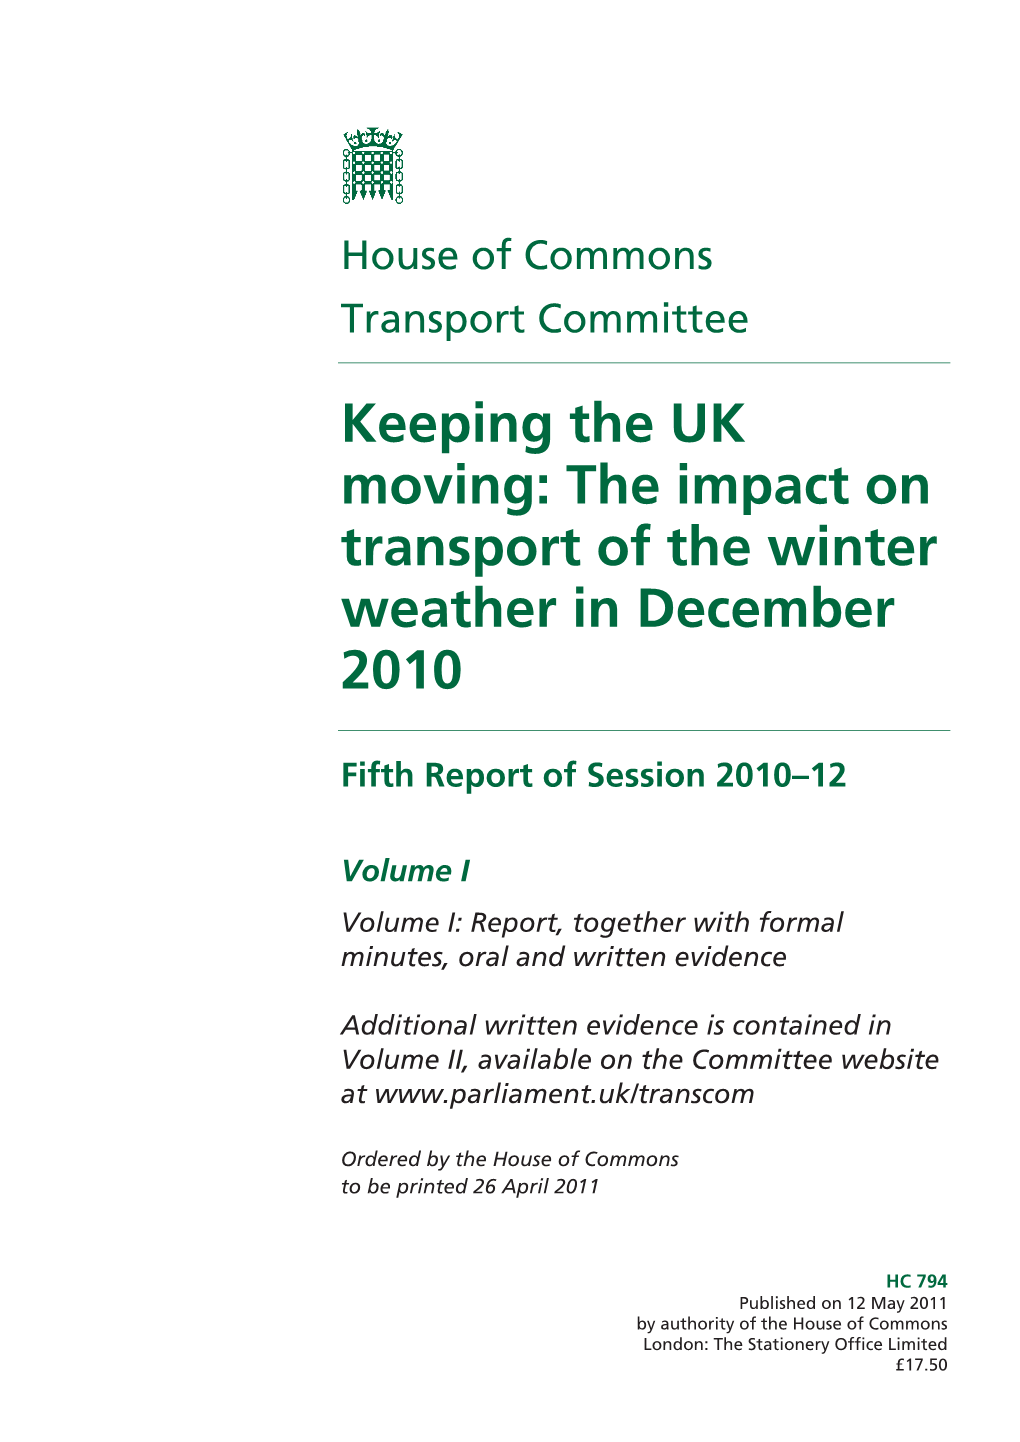 The Impact on Transport of the Winter Weather in December 2010